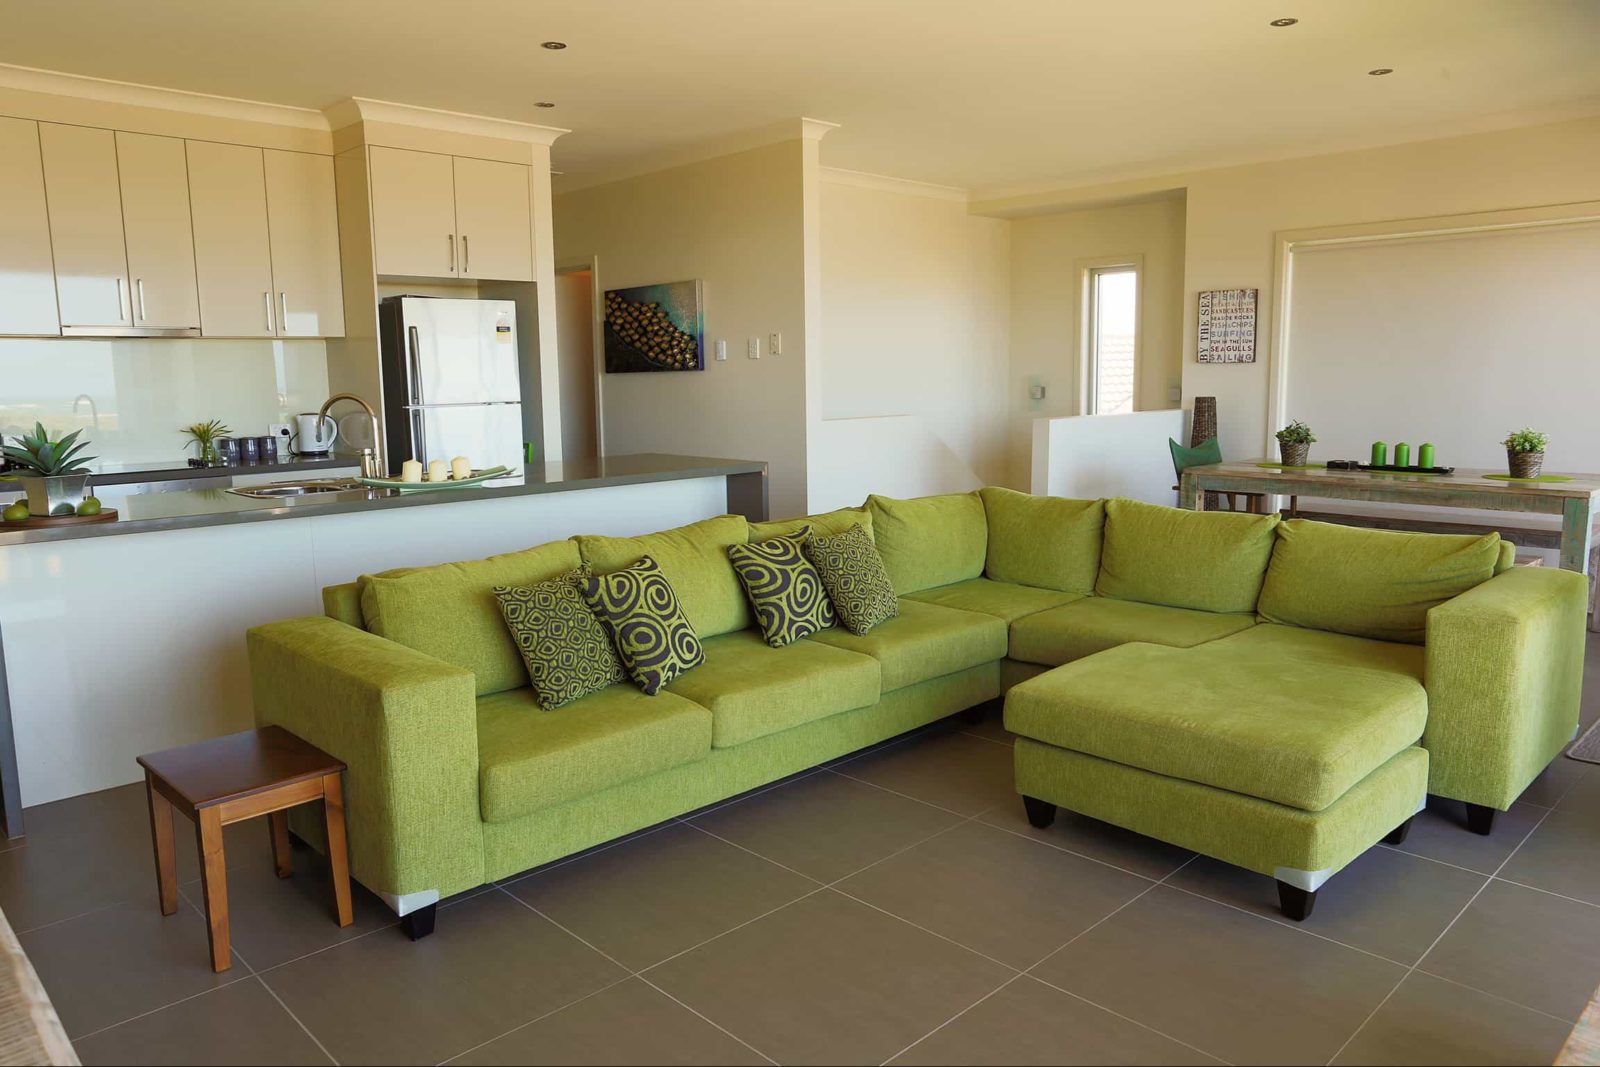 LOUNGE ROOM, KITCHEN, DINING - OPEN PLAN LIVING THE SOFA PERFECTLY PLACED TO SOAK IN THE VIEW